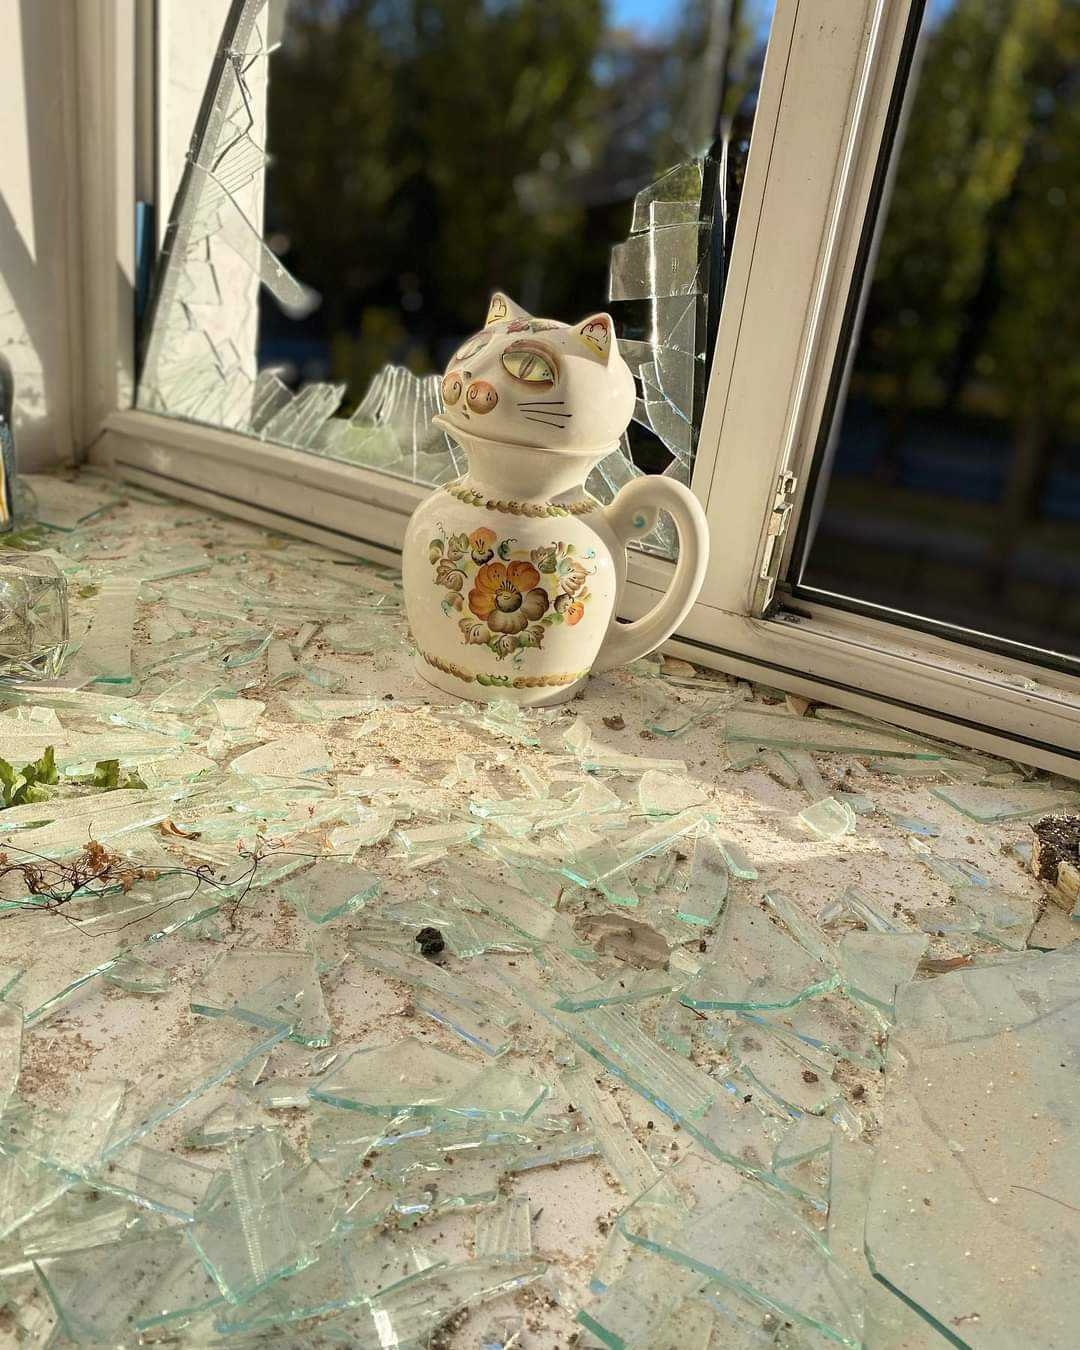 The porcelain cat that survived the missile strike on a window sill in a study room of the Institute of Philology. Photo by 
Volodymyr Bugrov
